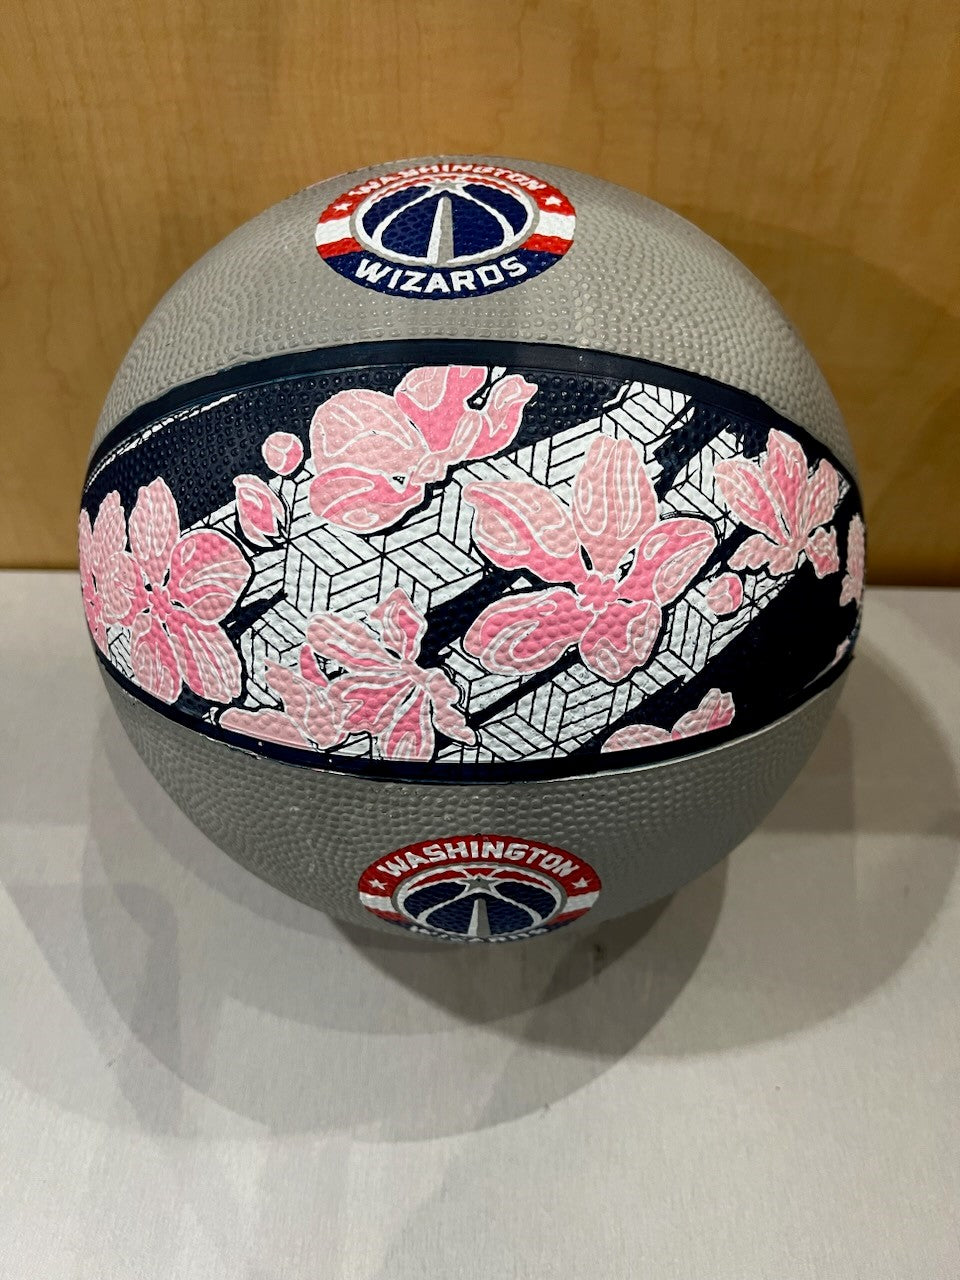 Wizards Cherry Blossom Basketball – Official Mobile Shop of the